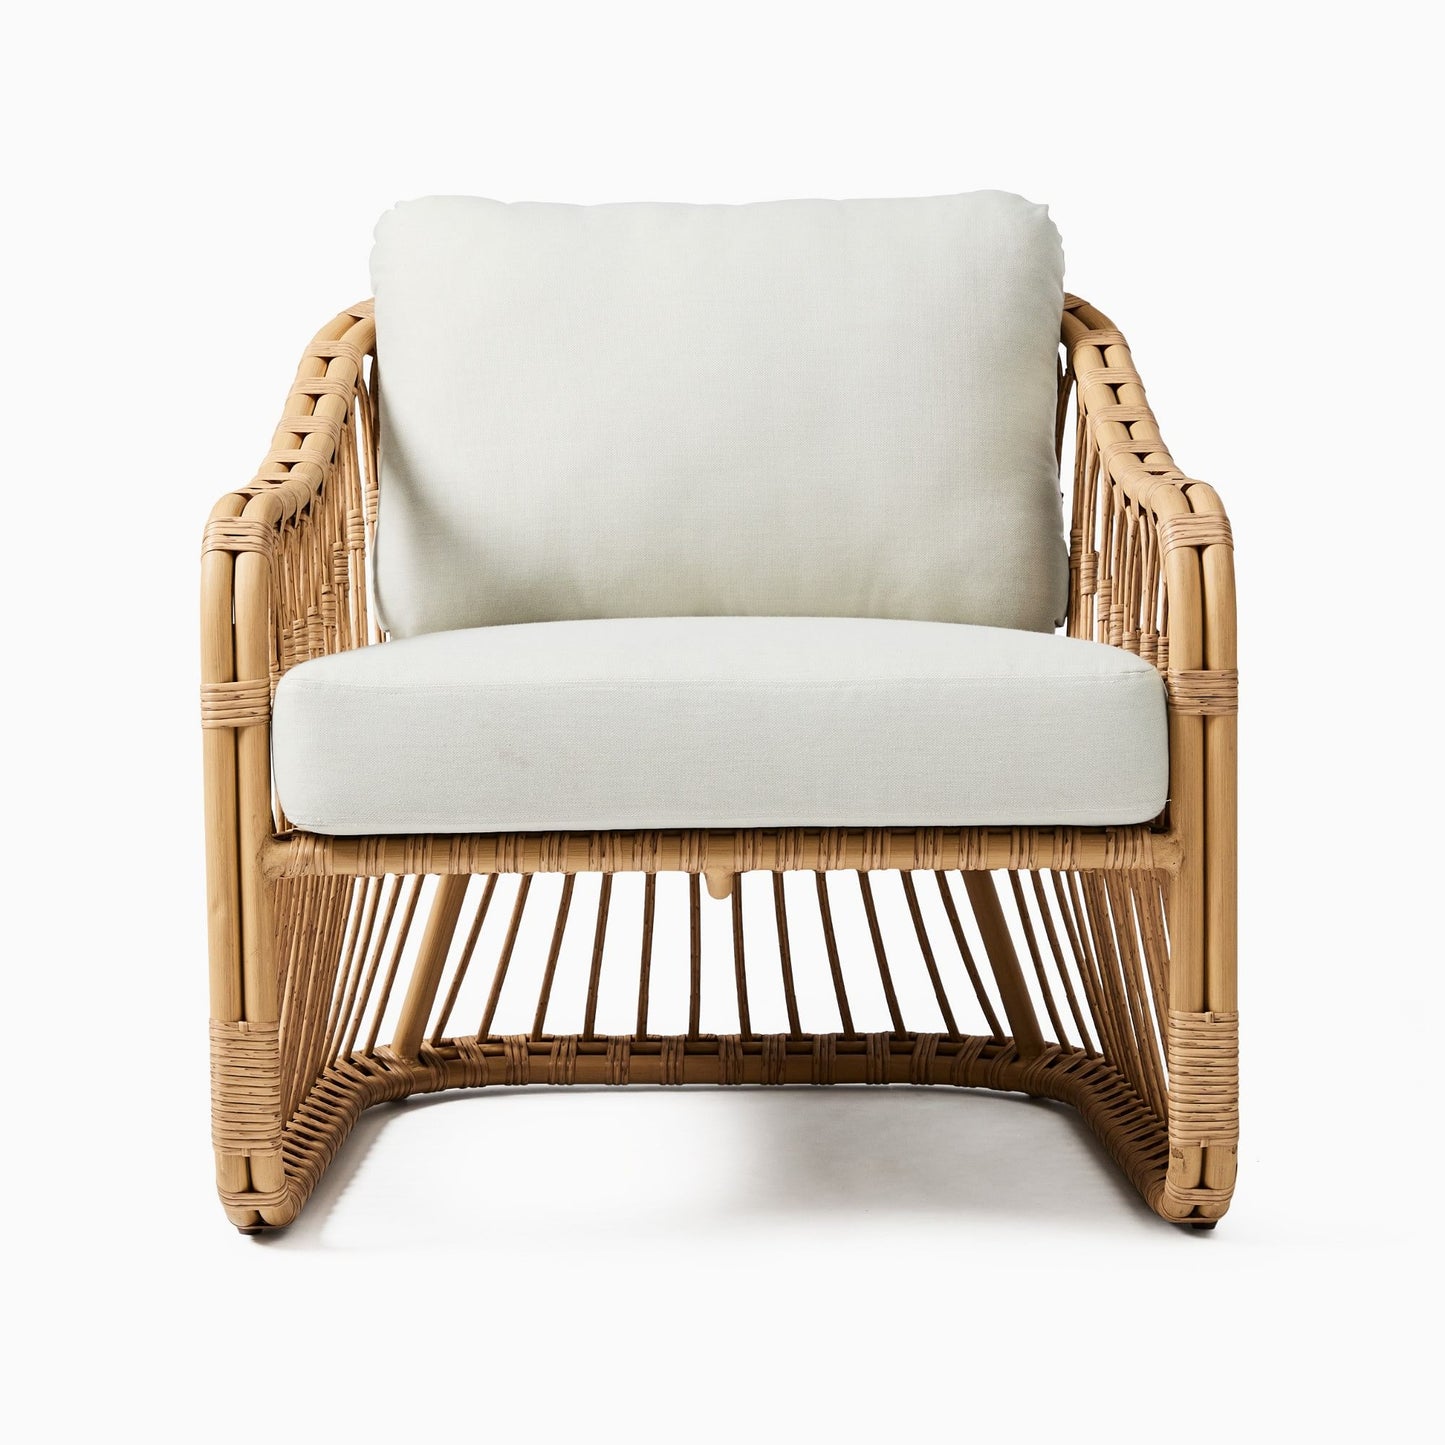 Cane chairs for Lounge | Bamboo Chairs for Living rooms- Adah - Akway